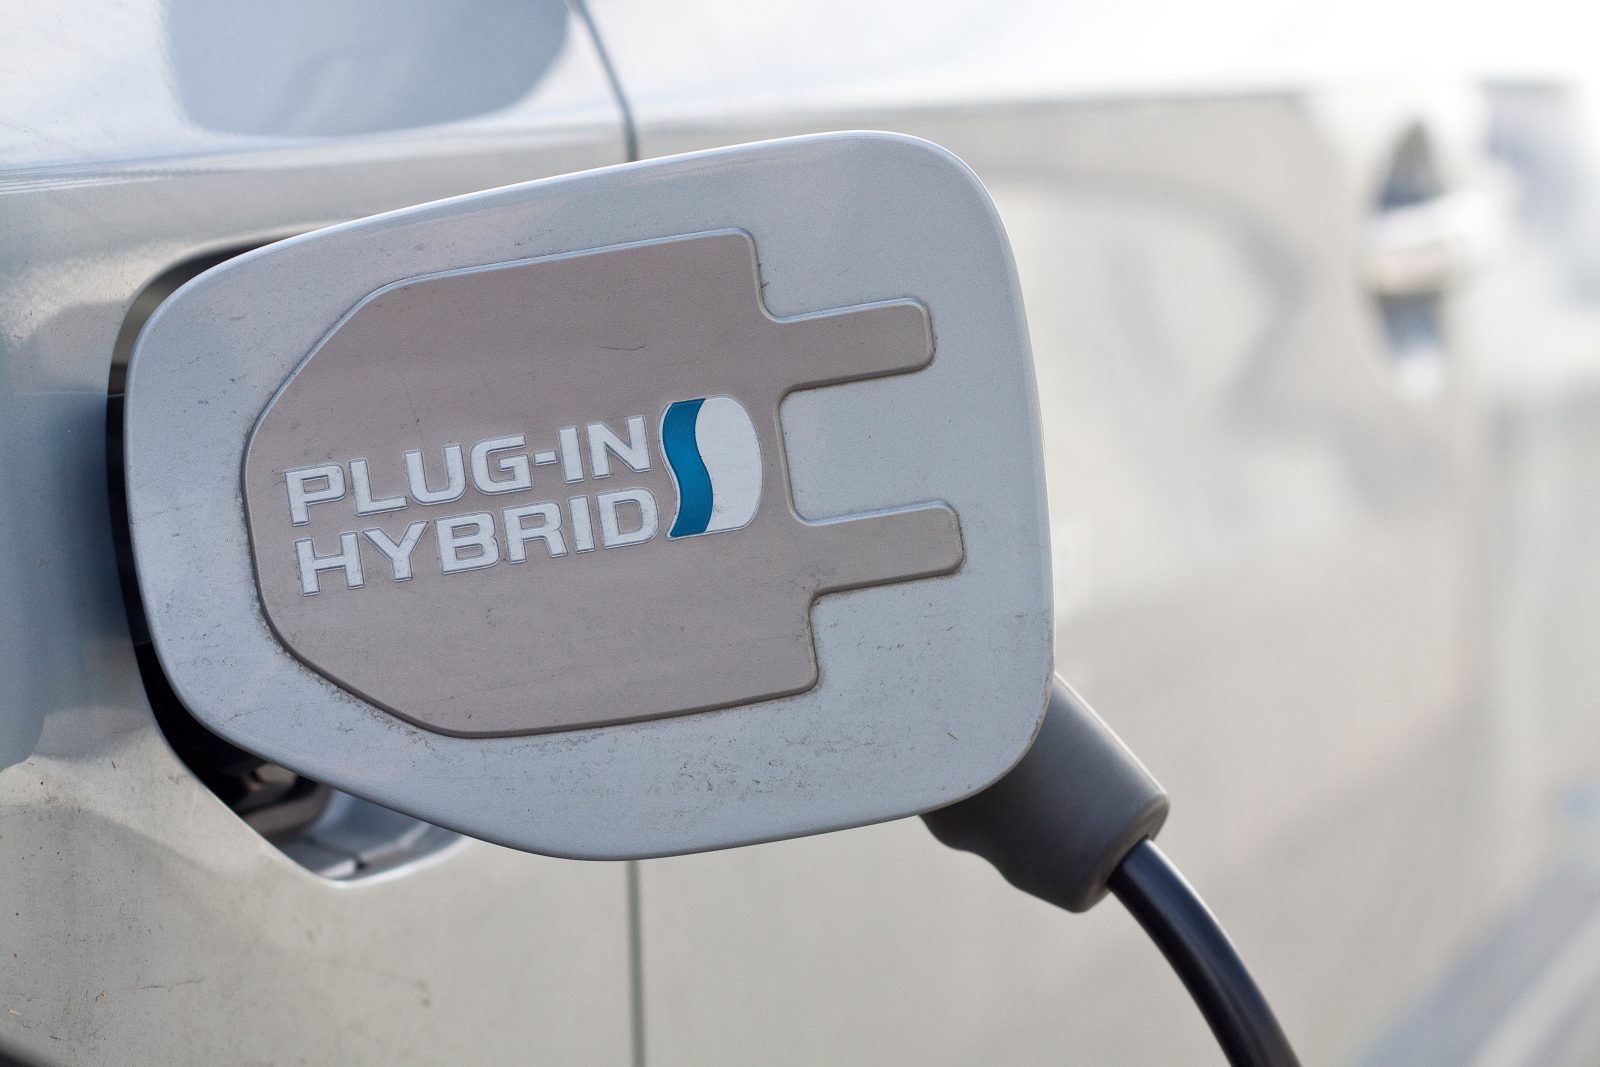 The ban on hybrid cars UK – what is it and when?